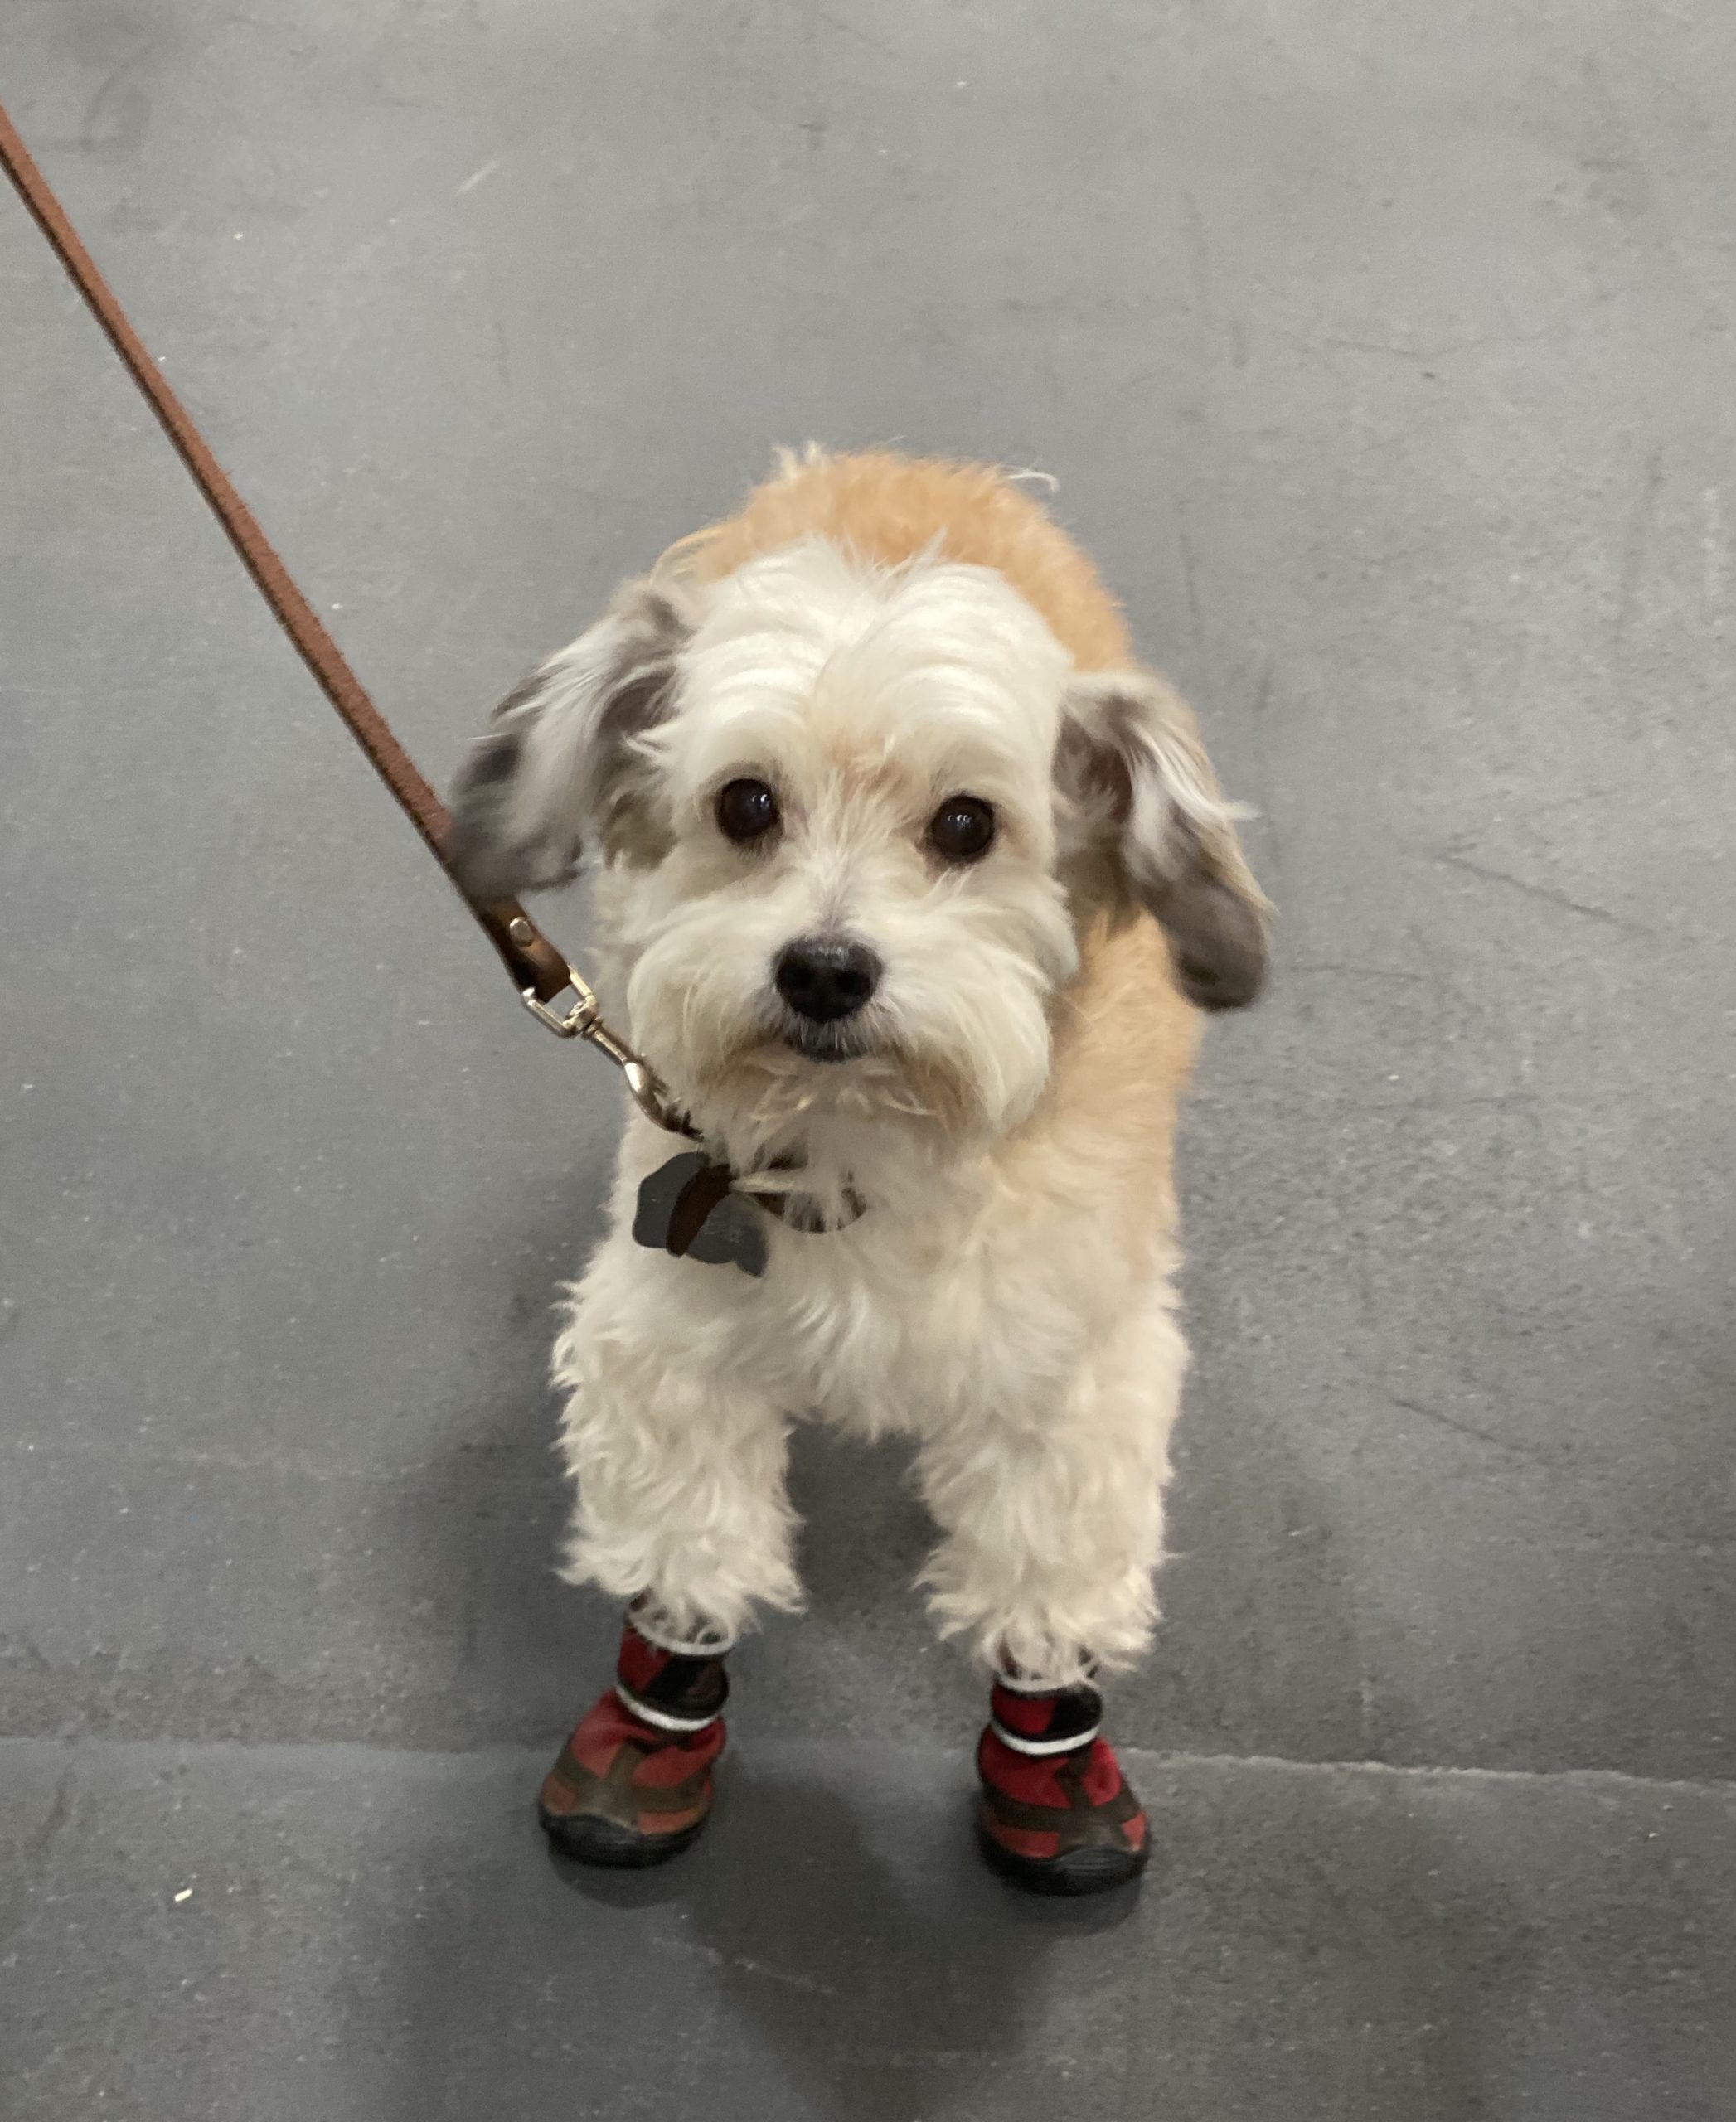 Small Fluffy Dog In Shoes